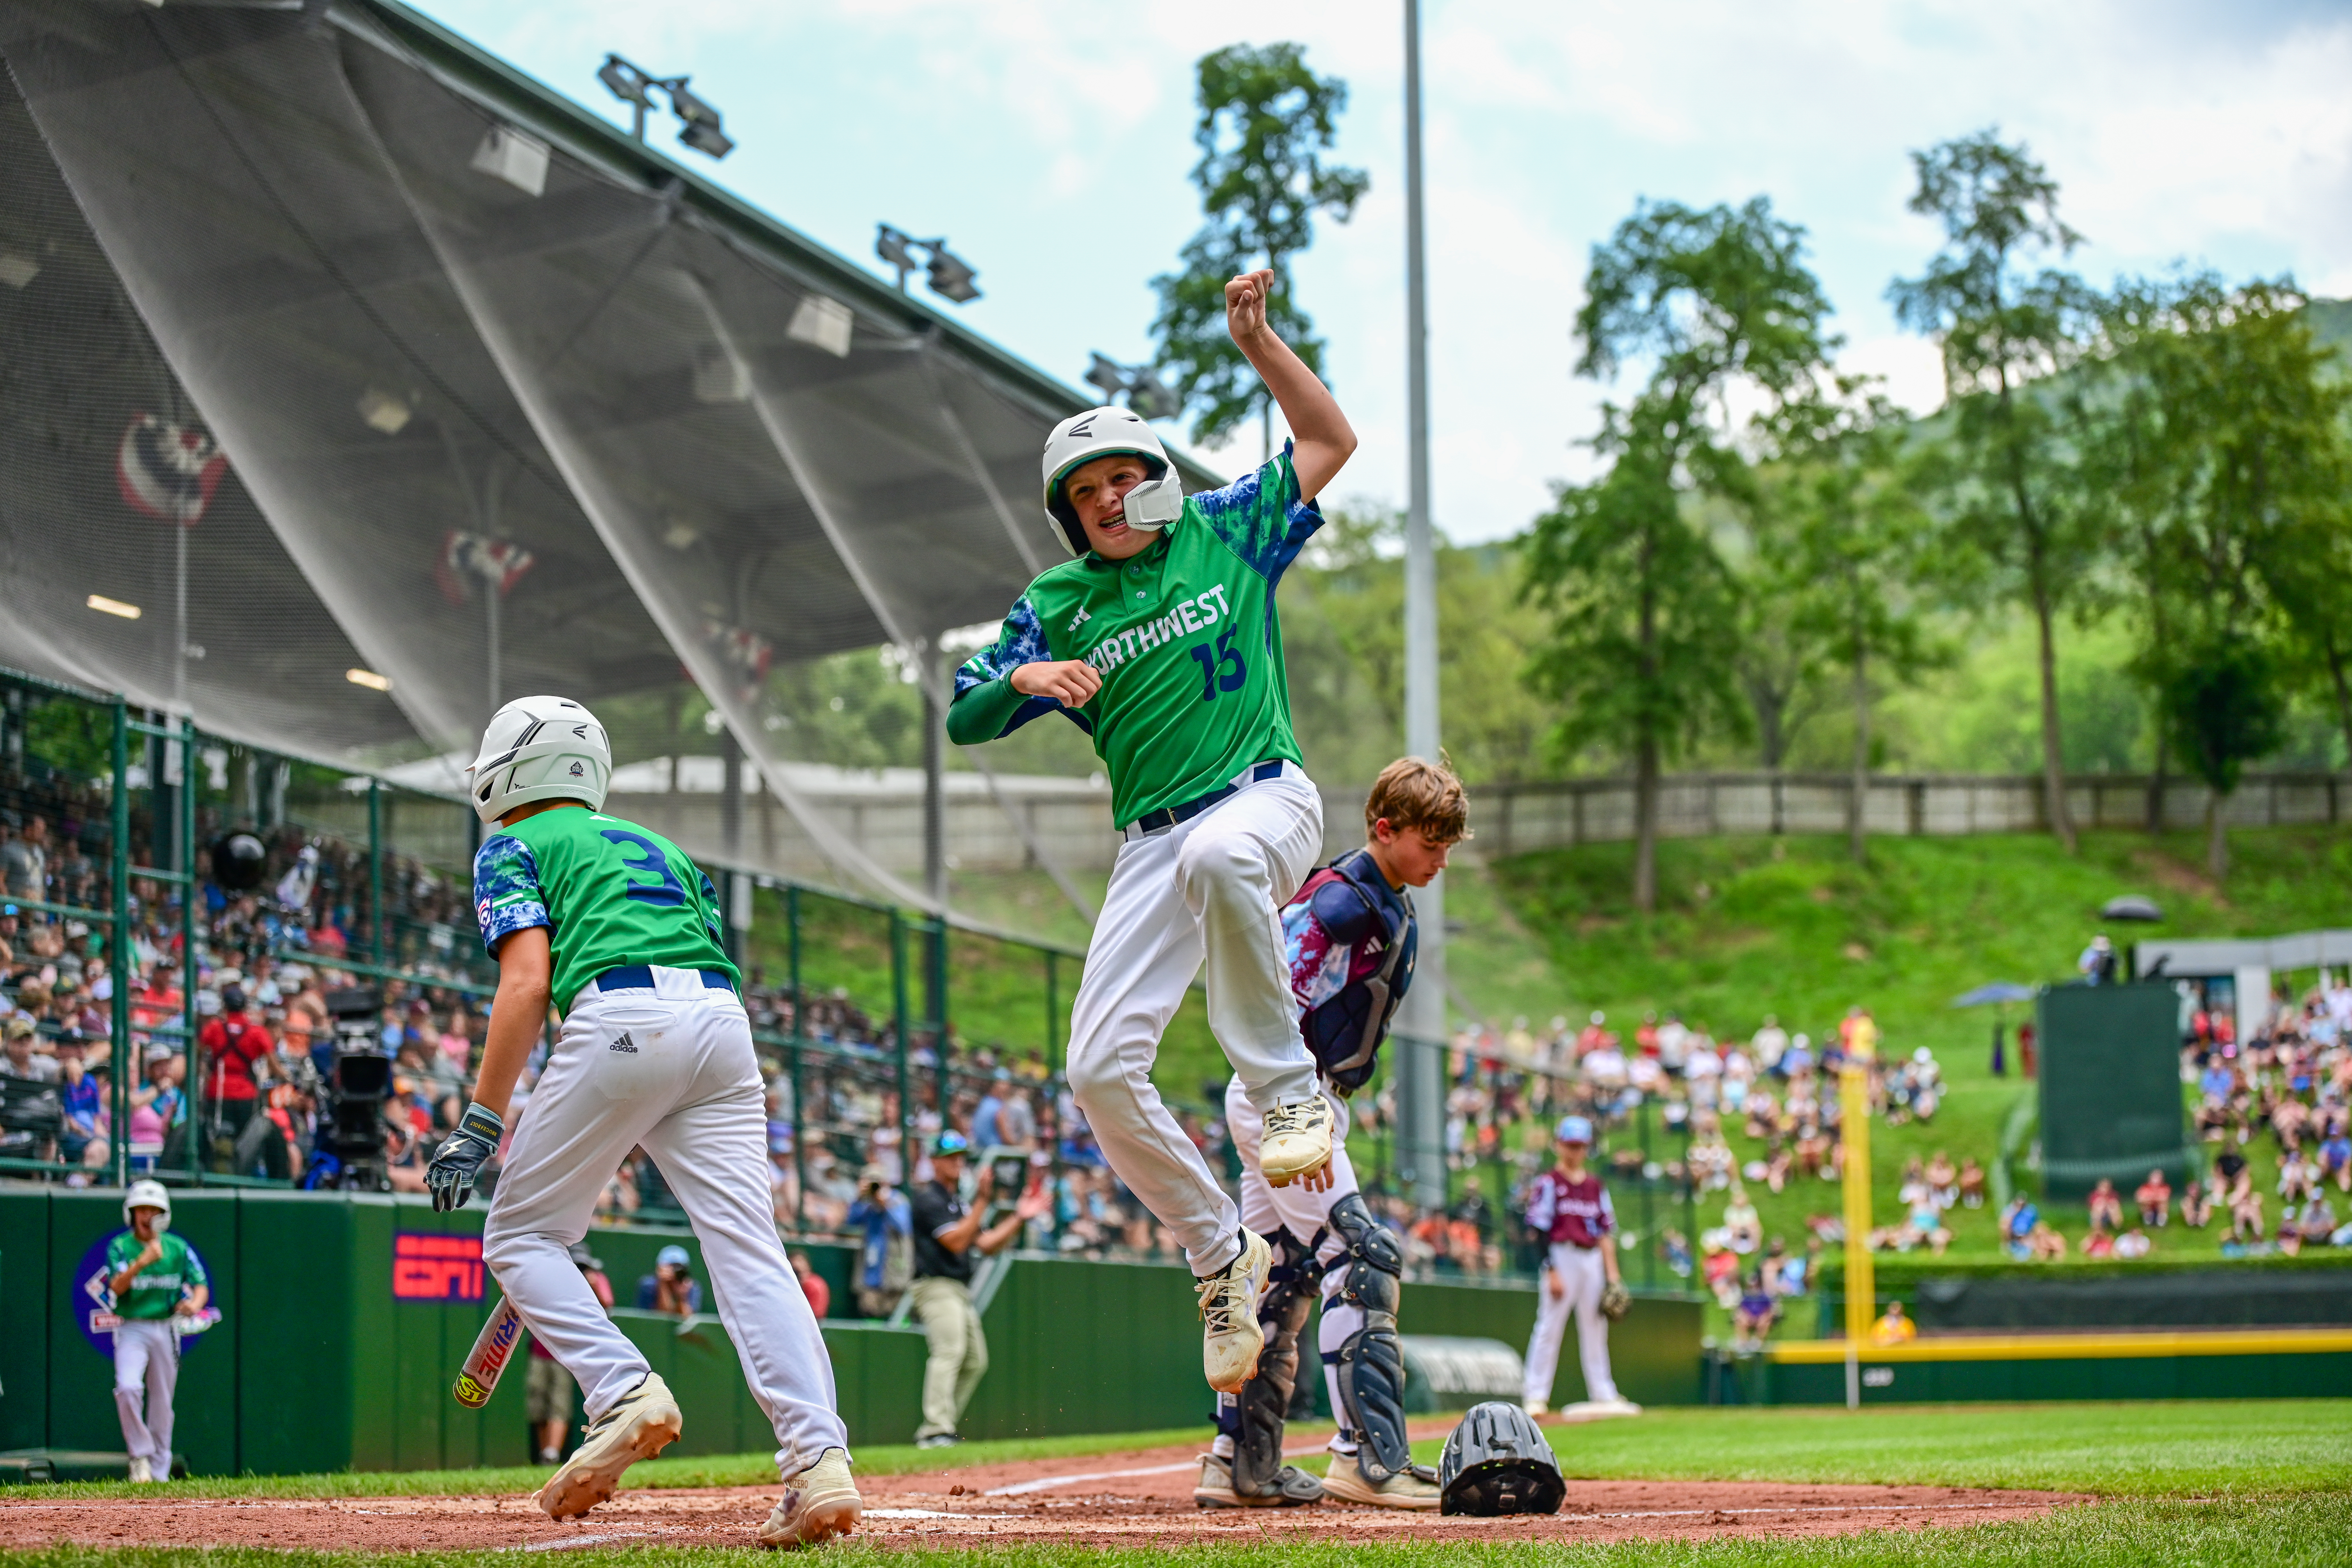 What swag did Little League World Series players, umpires go home